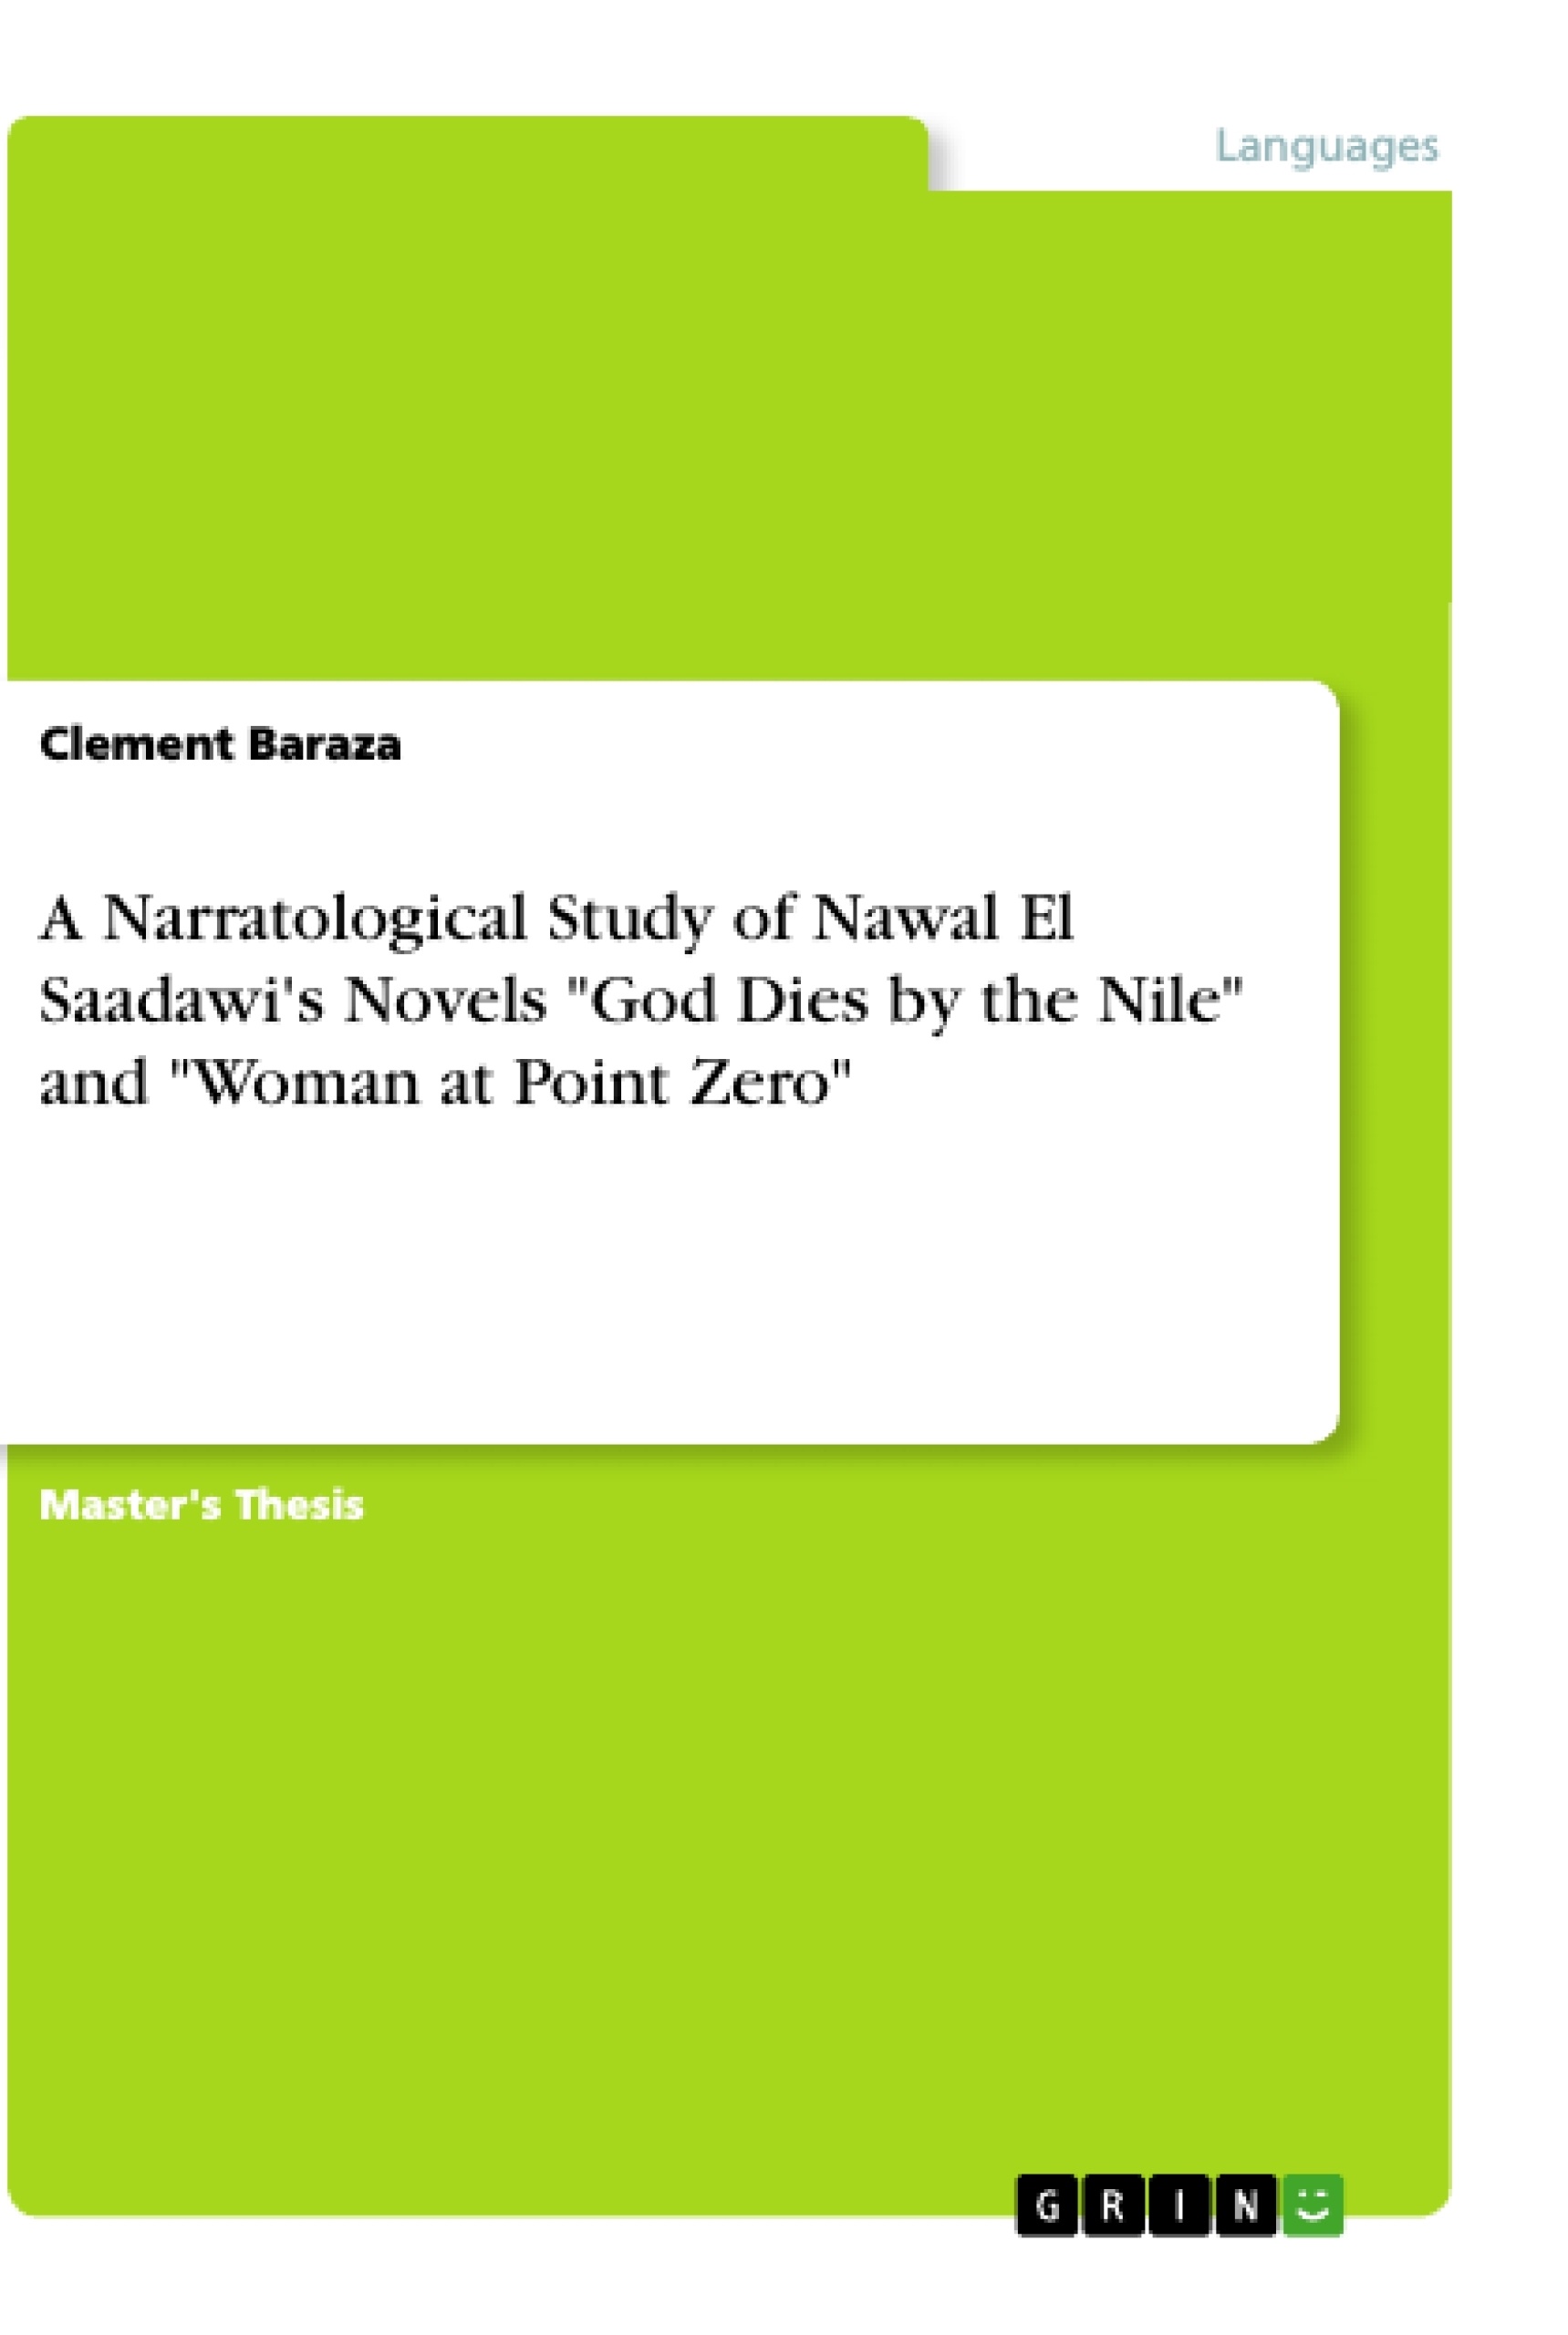 Título: A Narratological Study of Nawal El Saadawi's Novels "God Dies by the Nile" and "Woman at Point Zero"